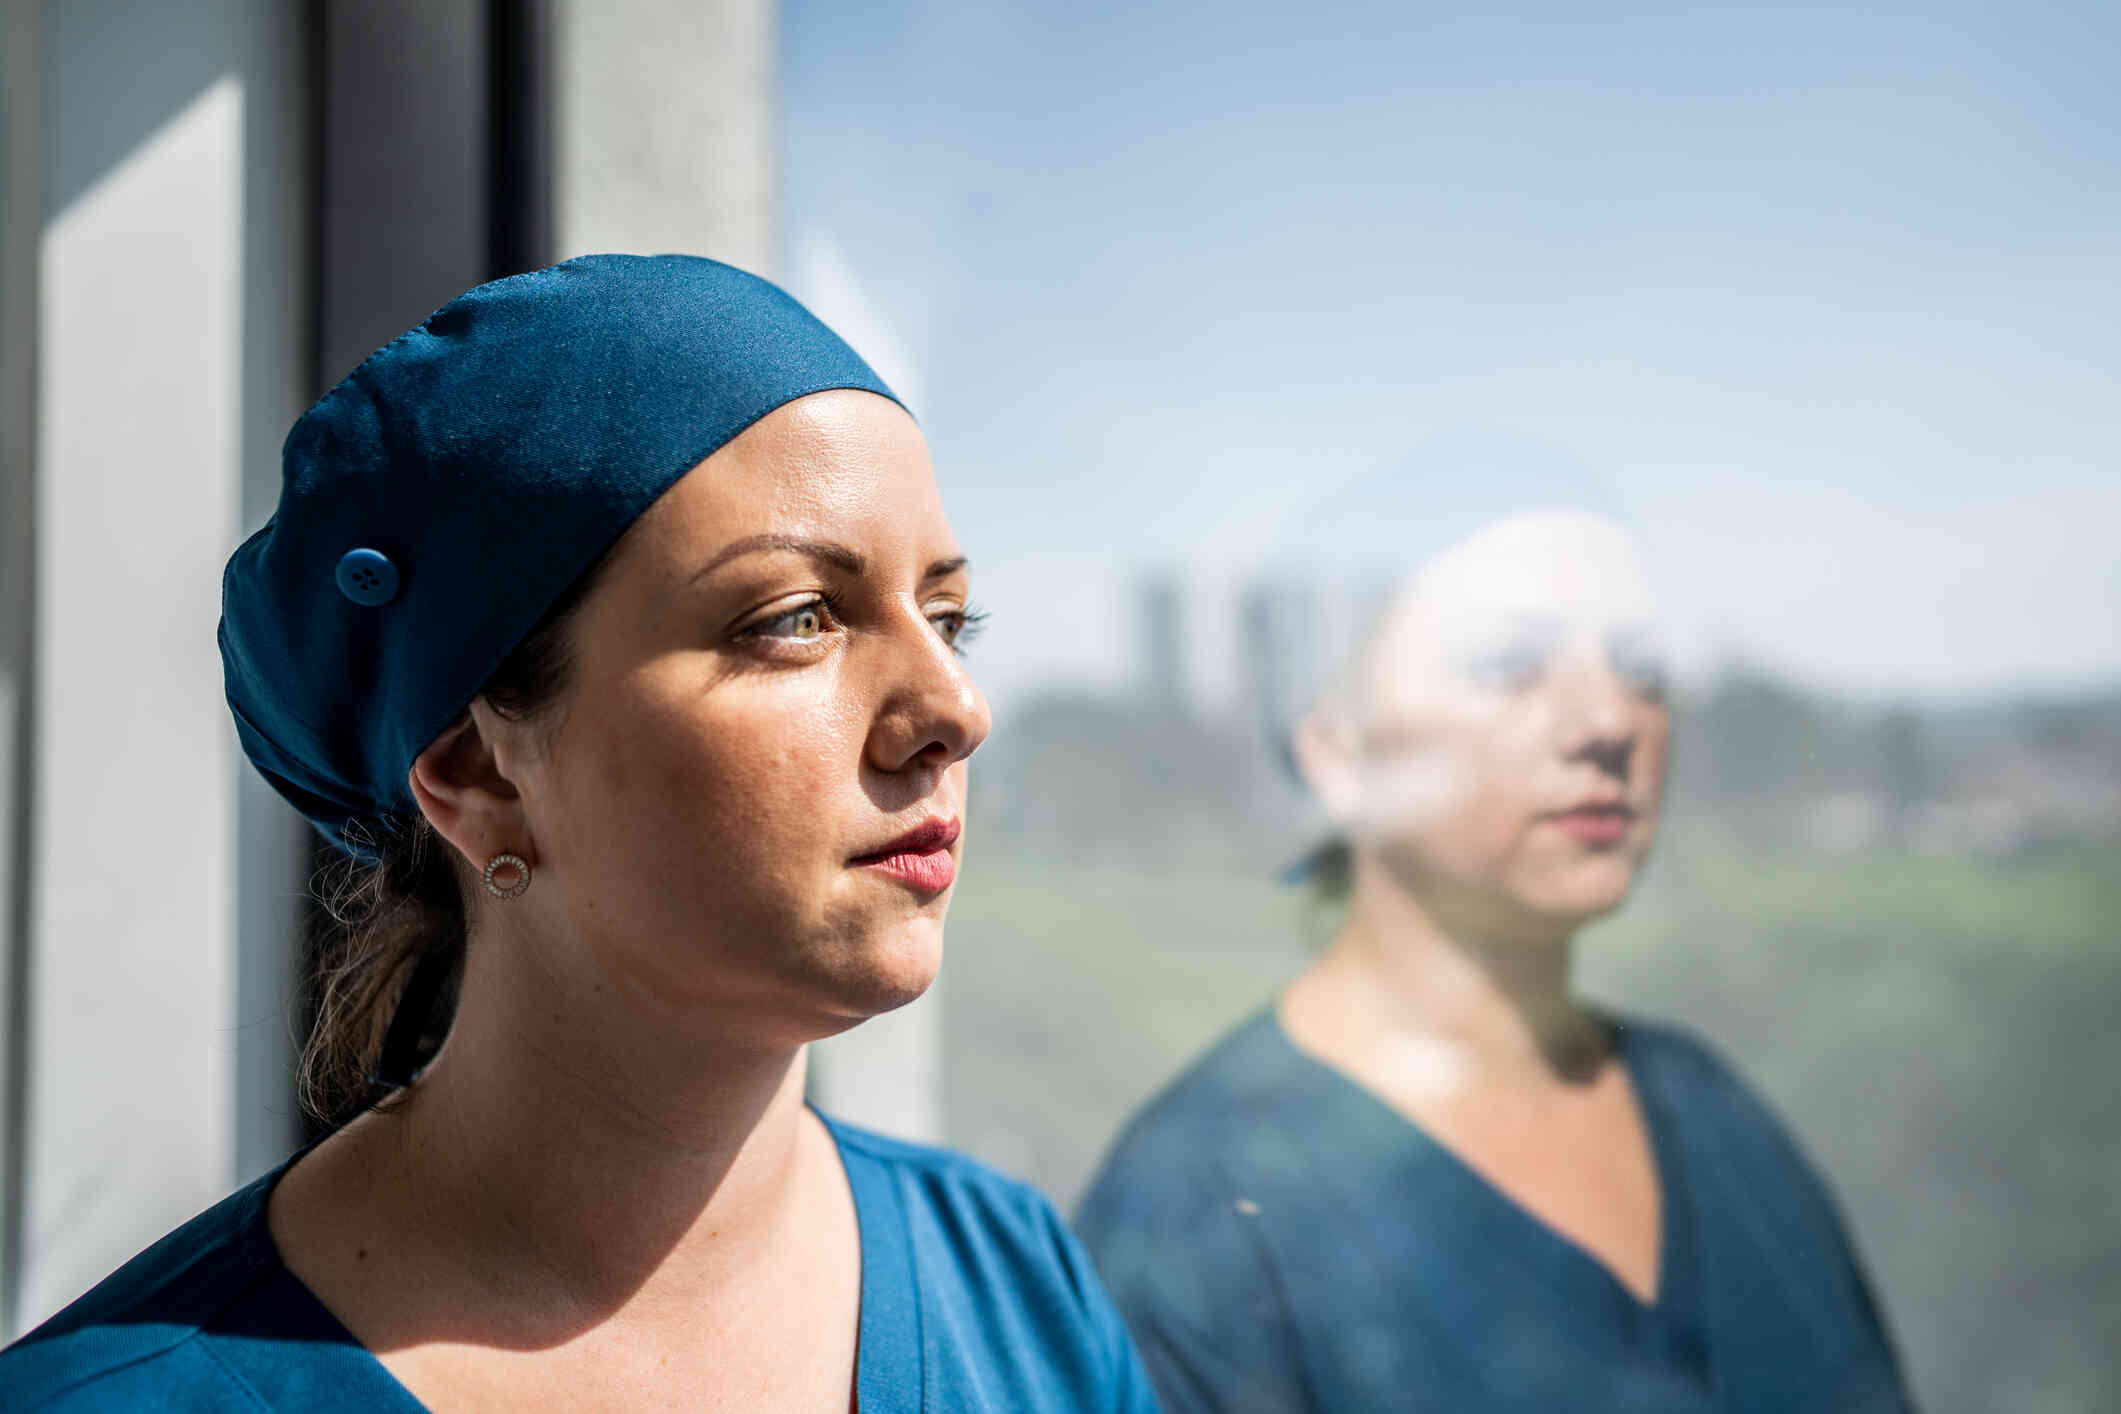 A female surgeon in blue scrubs stands near a window and gazes out while deep in thought.